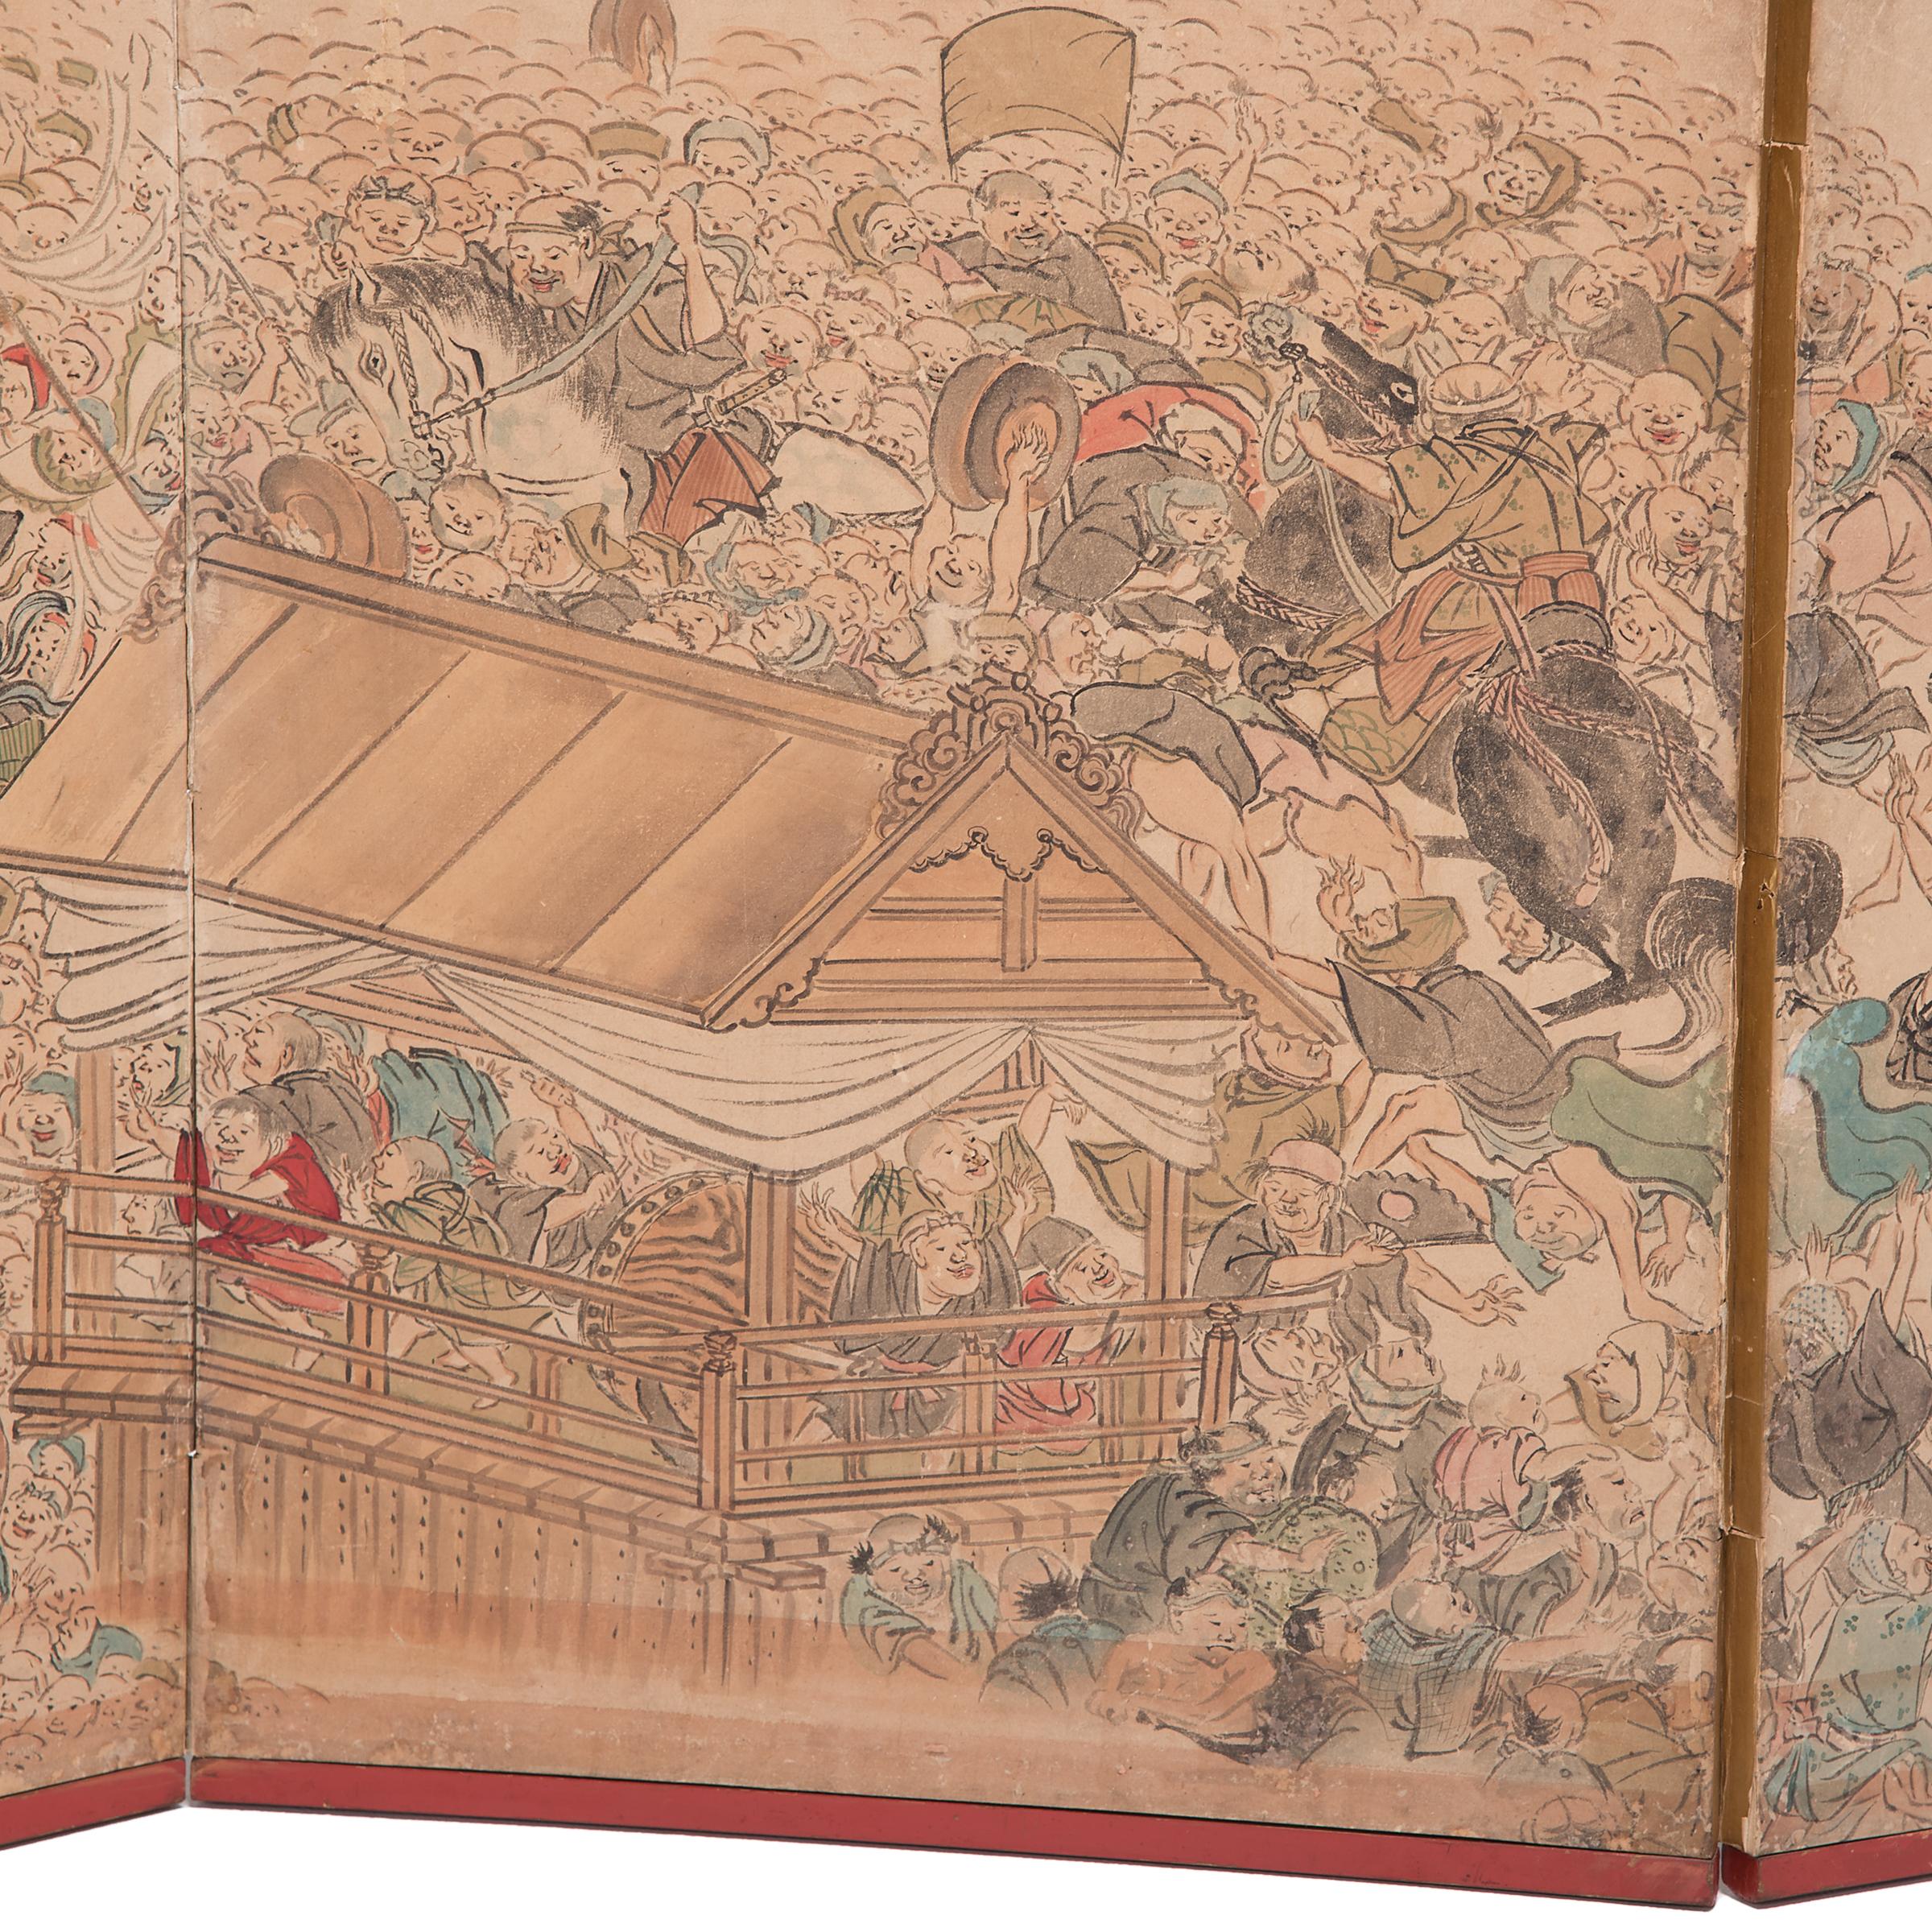 This 18th-century folding screen is a stunning example of Japanese artistry. Beautifully painted with delicate brushwork, the evocative screen depicts a lively festival during the Edo period (1615–1912). The raucous scene is full of life; within the